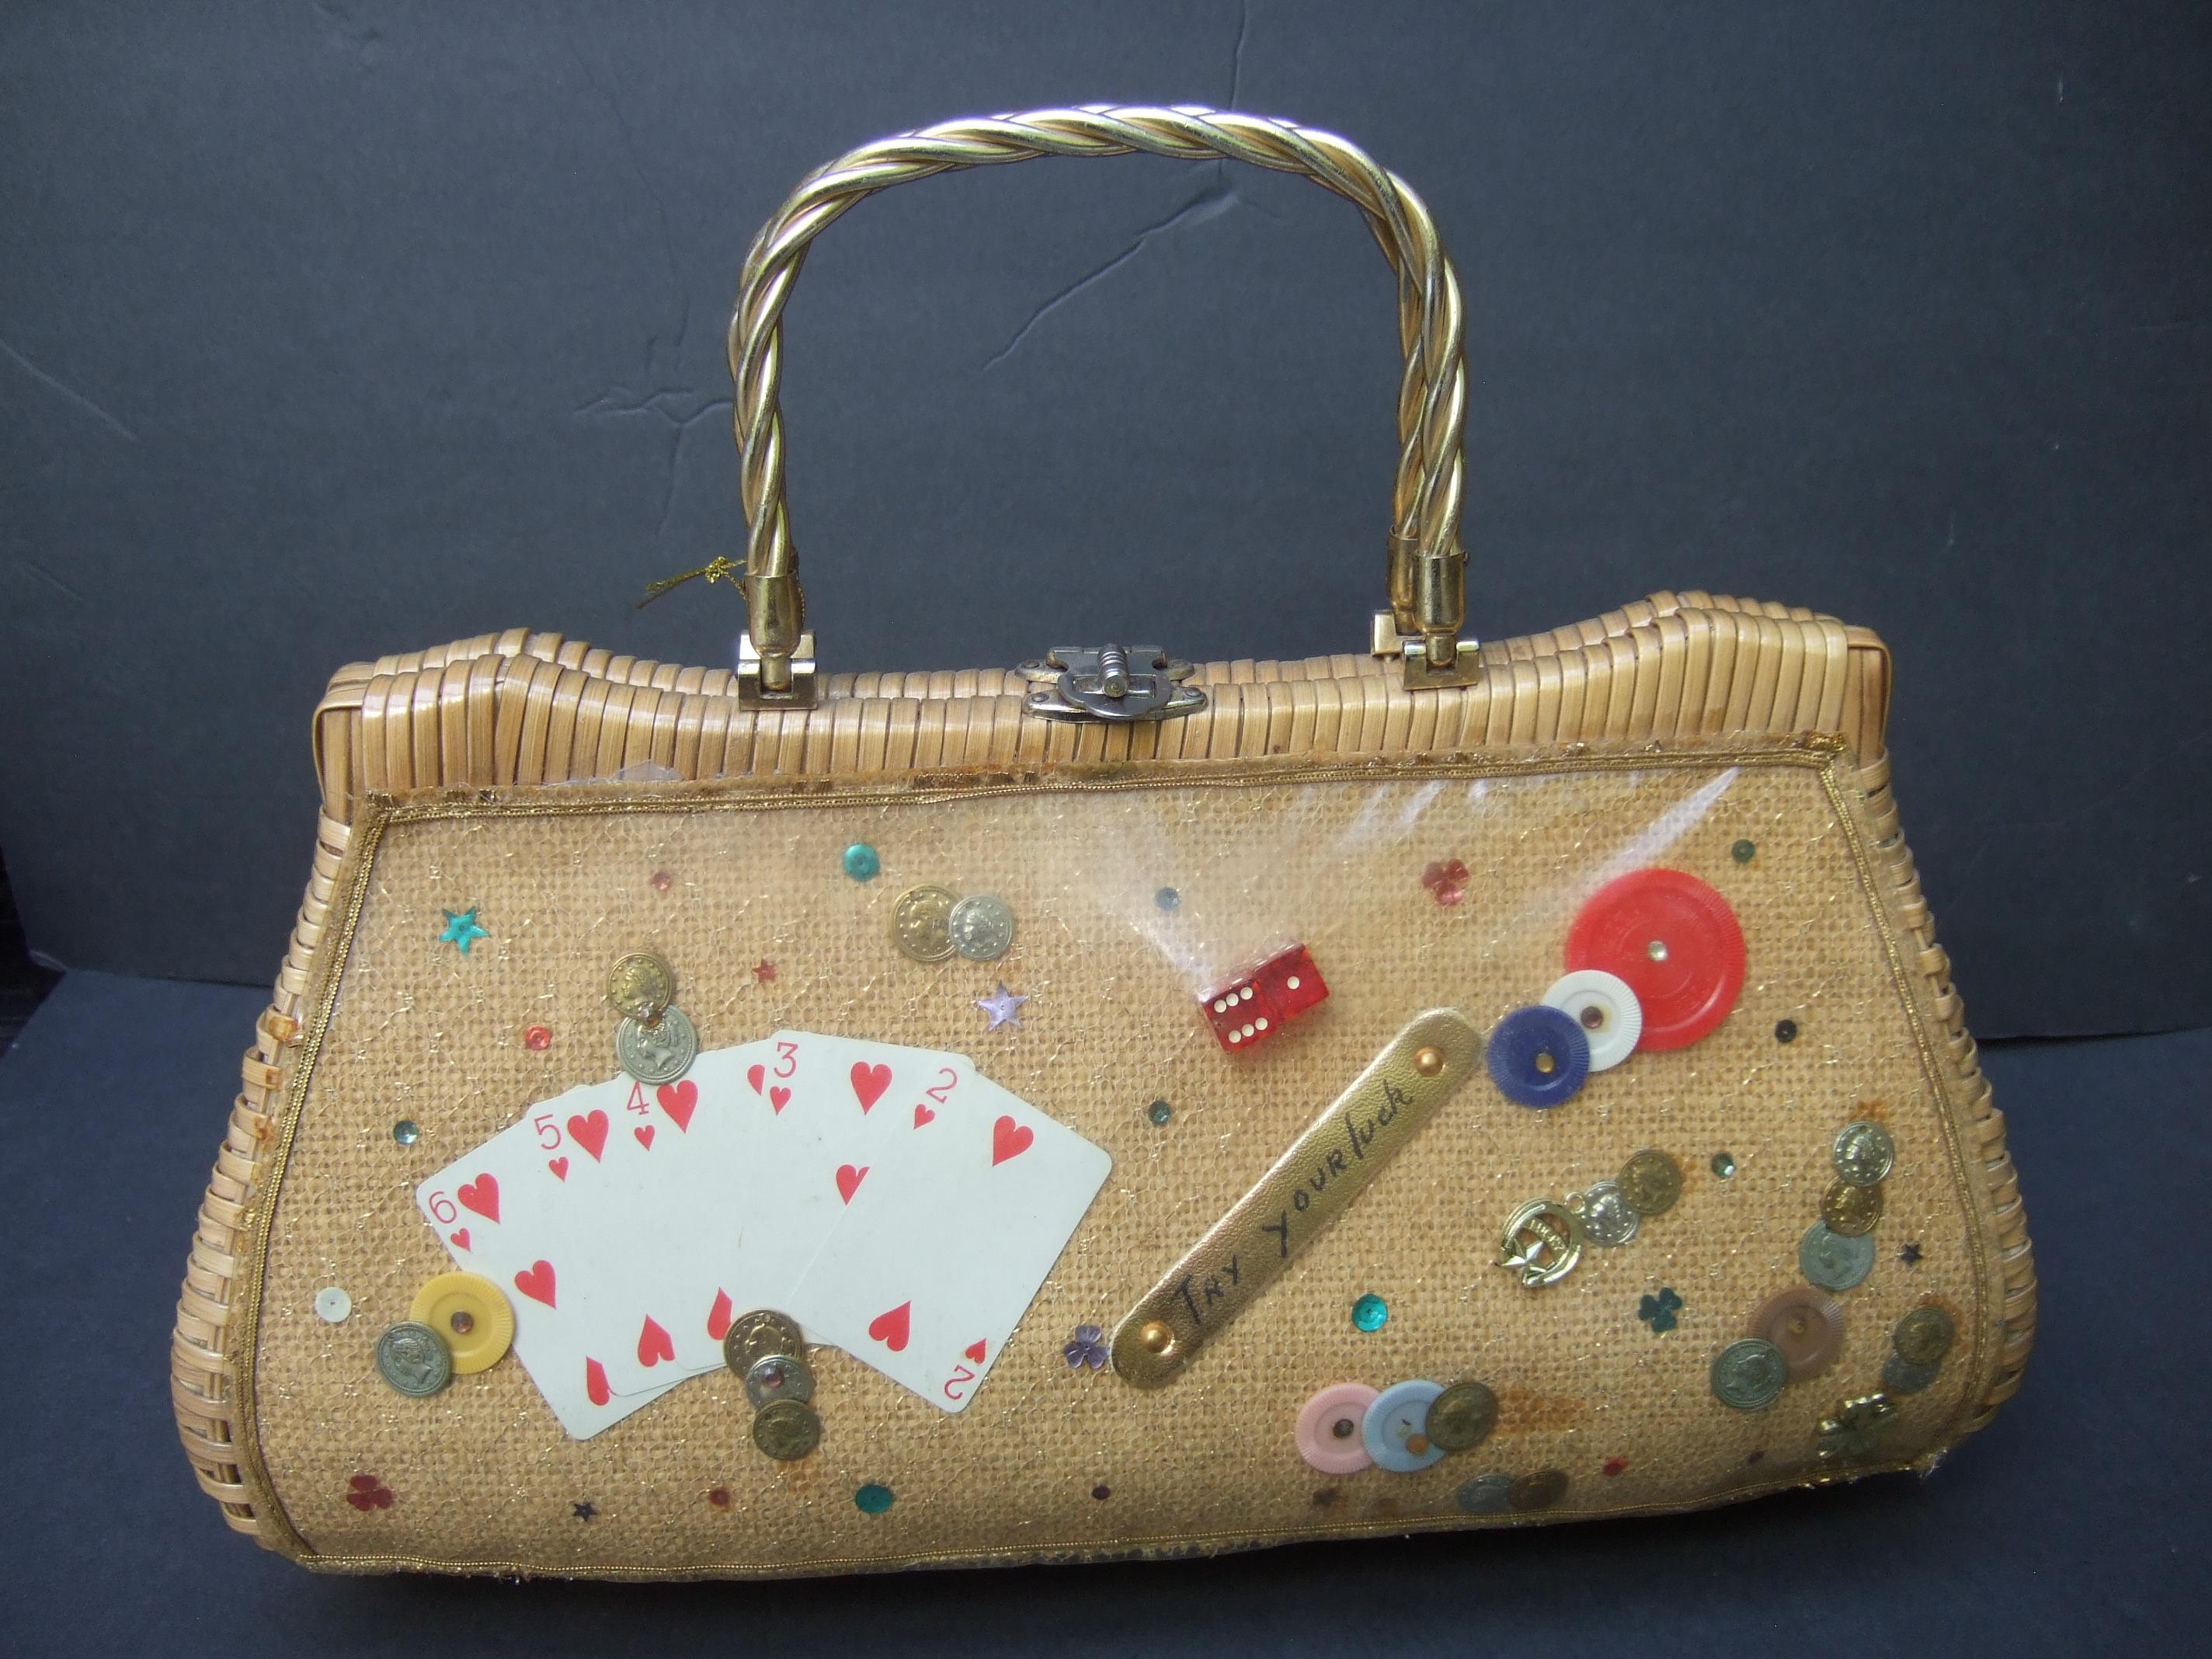 
Whimsical woven wicker gambling themed retro top handle handbag c 1960
The quirky fun vintage handbag is decorated with a collection of gambling themed
items; playing cards, dice, chips & small metal replica coins 

The collection of gambling items